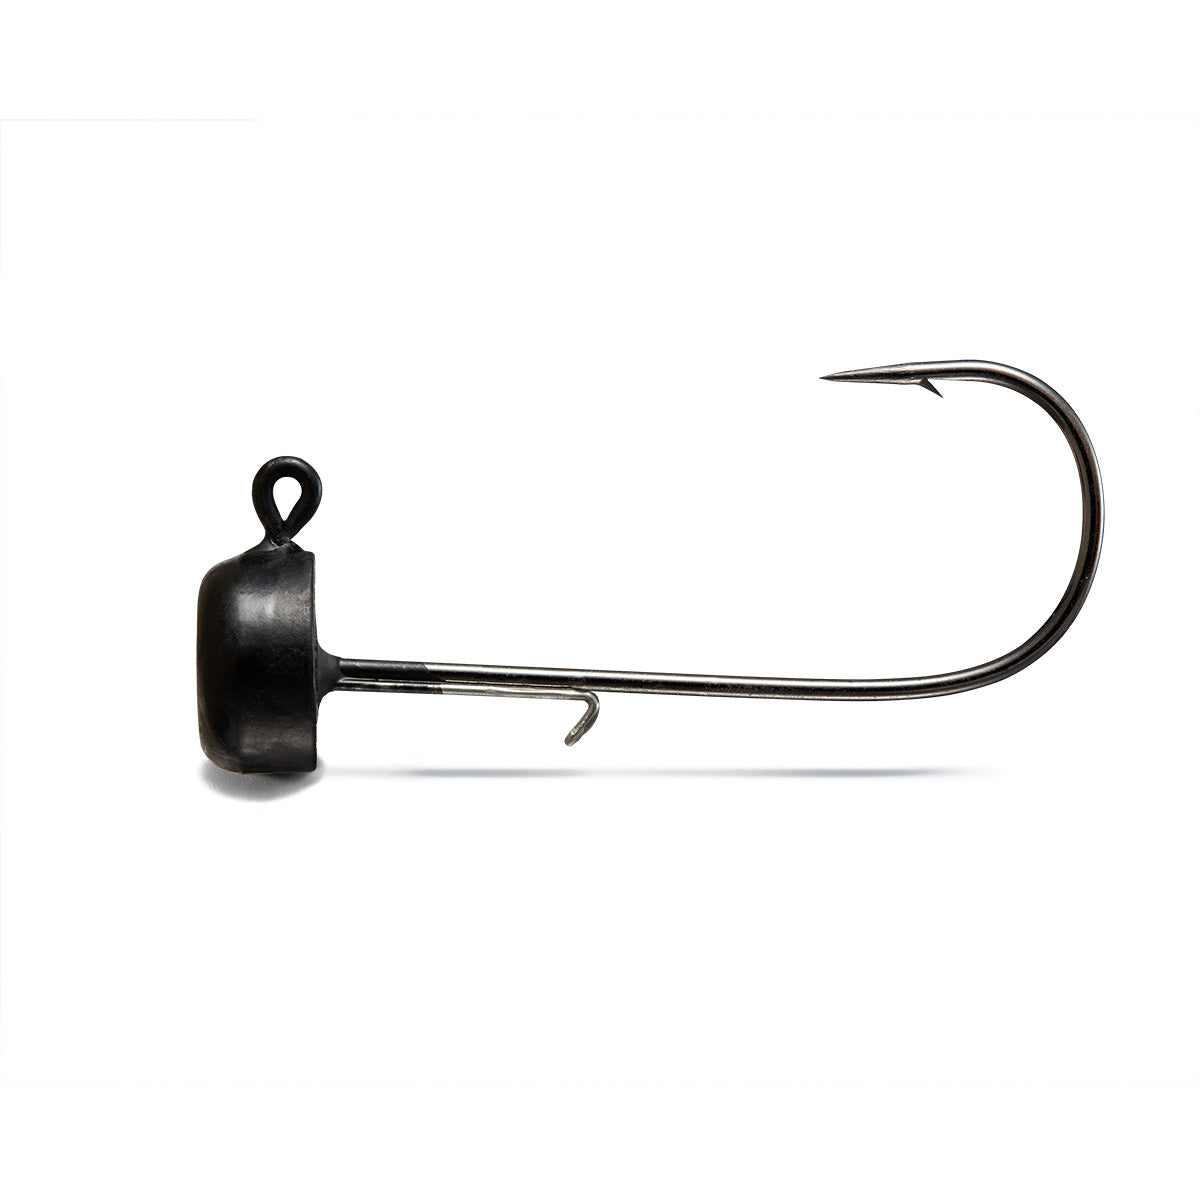 Soft Lure Finesse, Ned Rig Jig Heads, Ned Rig Jig Hook, Ned Rig Fishing